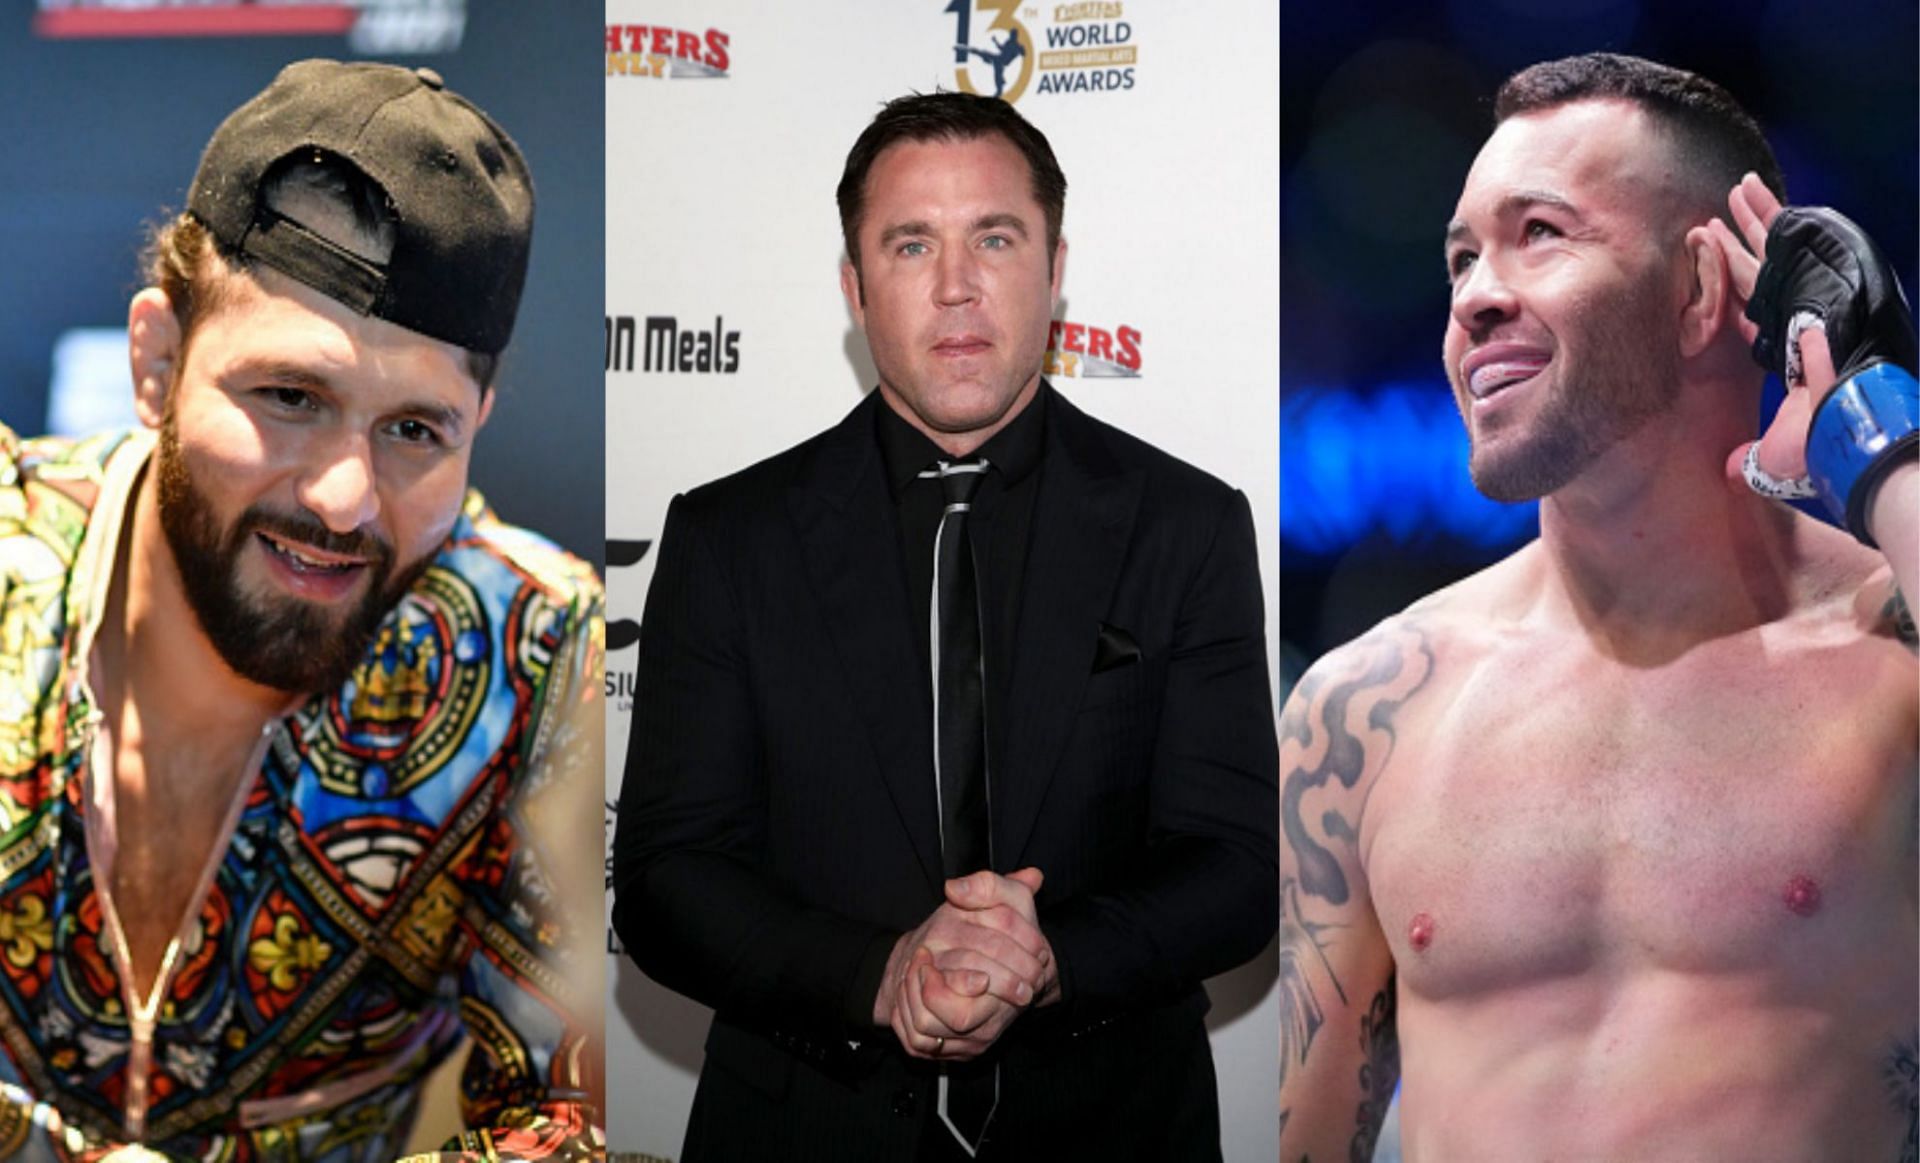 Chael Sonnen (M) thinks UFC fighters should learn marketing from Colby Covington (L) and Jorge Masvidal (R)